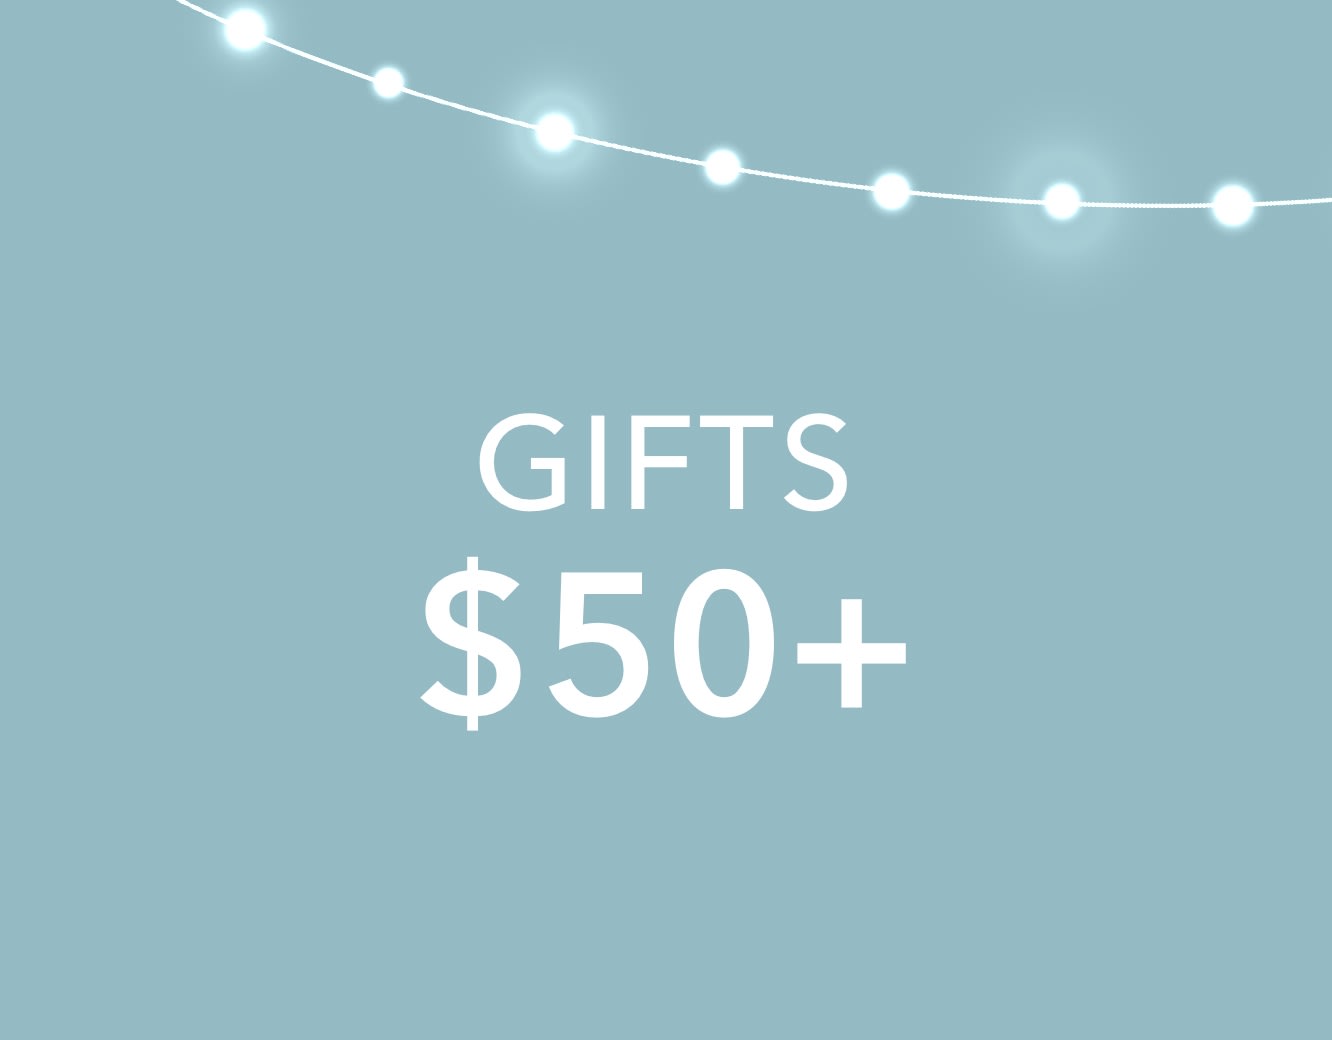 Gifts over $50 